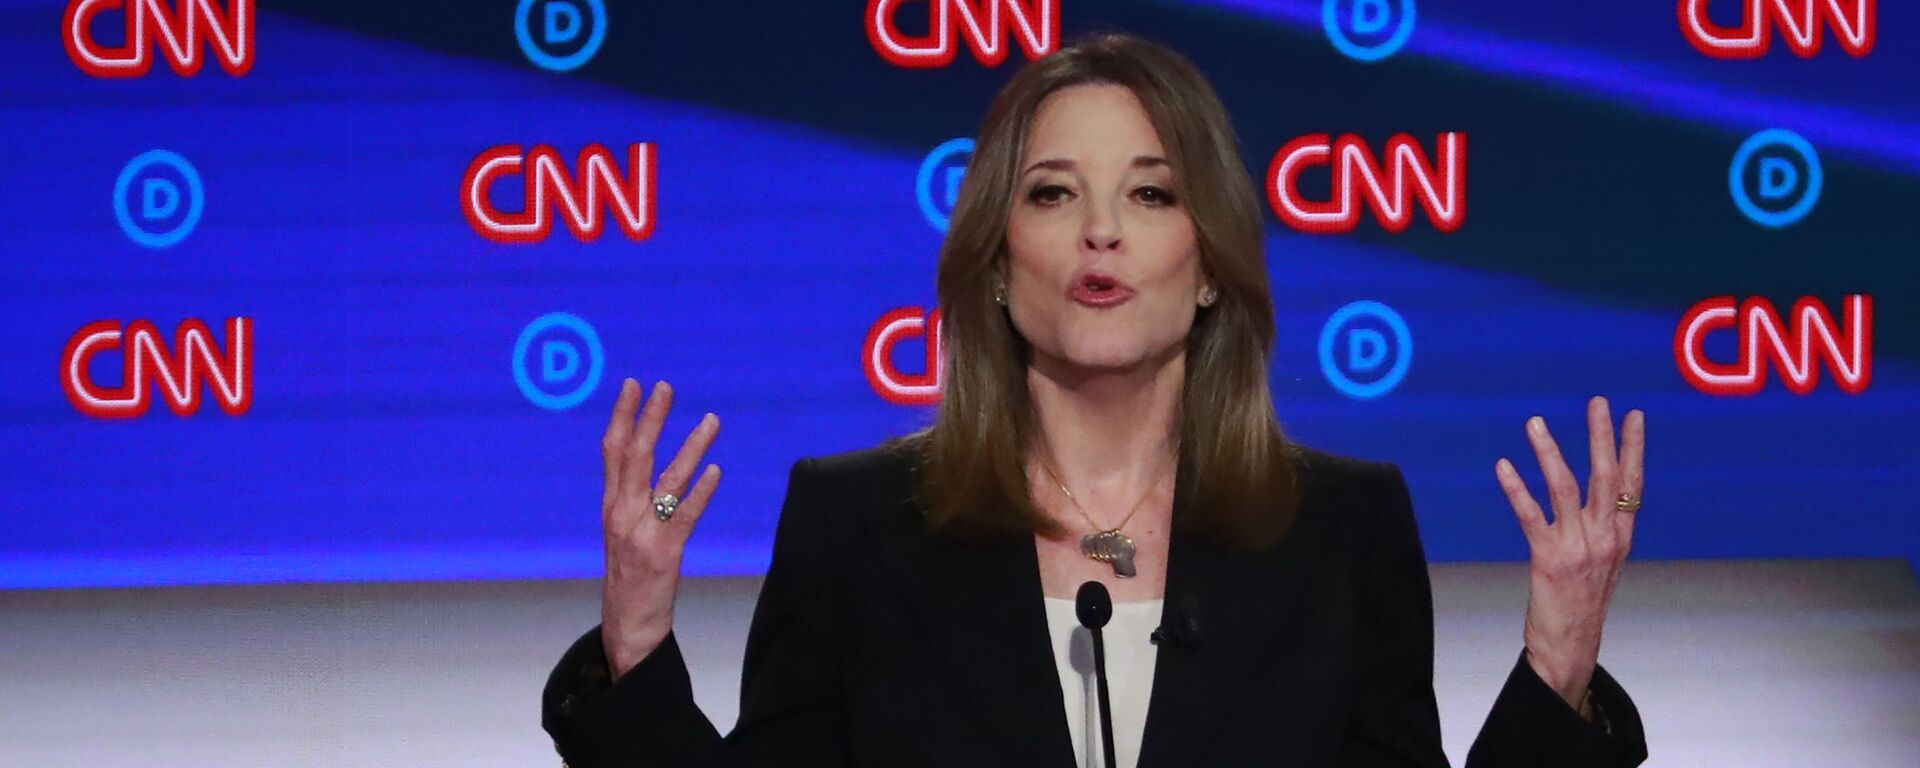 Candidate and author Marianne Williamson gestures during the first night of the second 2020 Democratic presidential debate in Detroit, Michigan, 30 July 2019. - Sputnik International, 1920, 31.07.2019